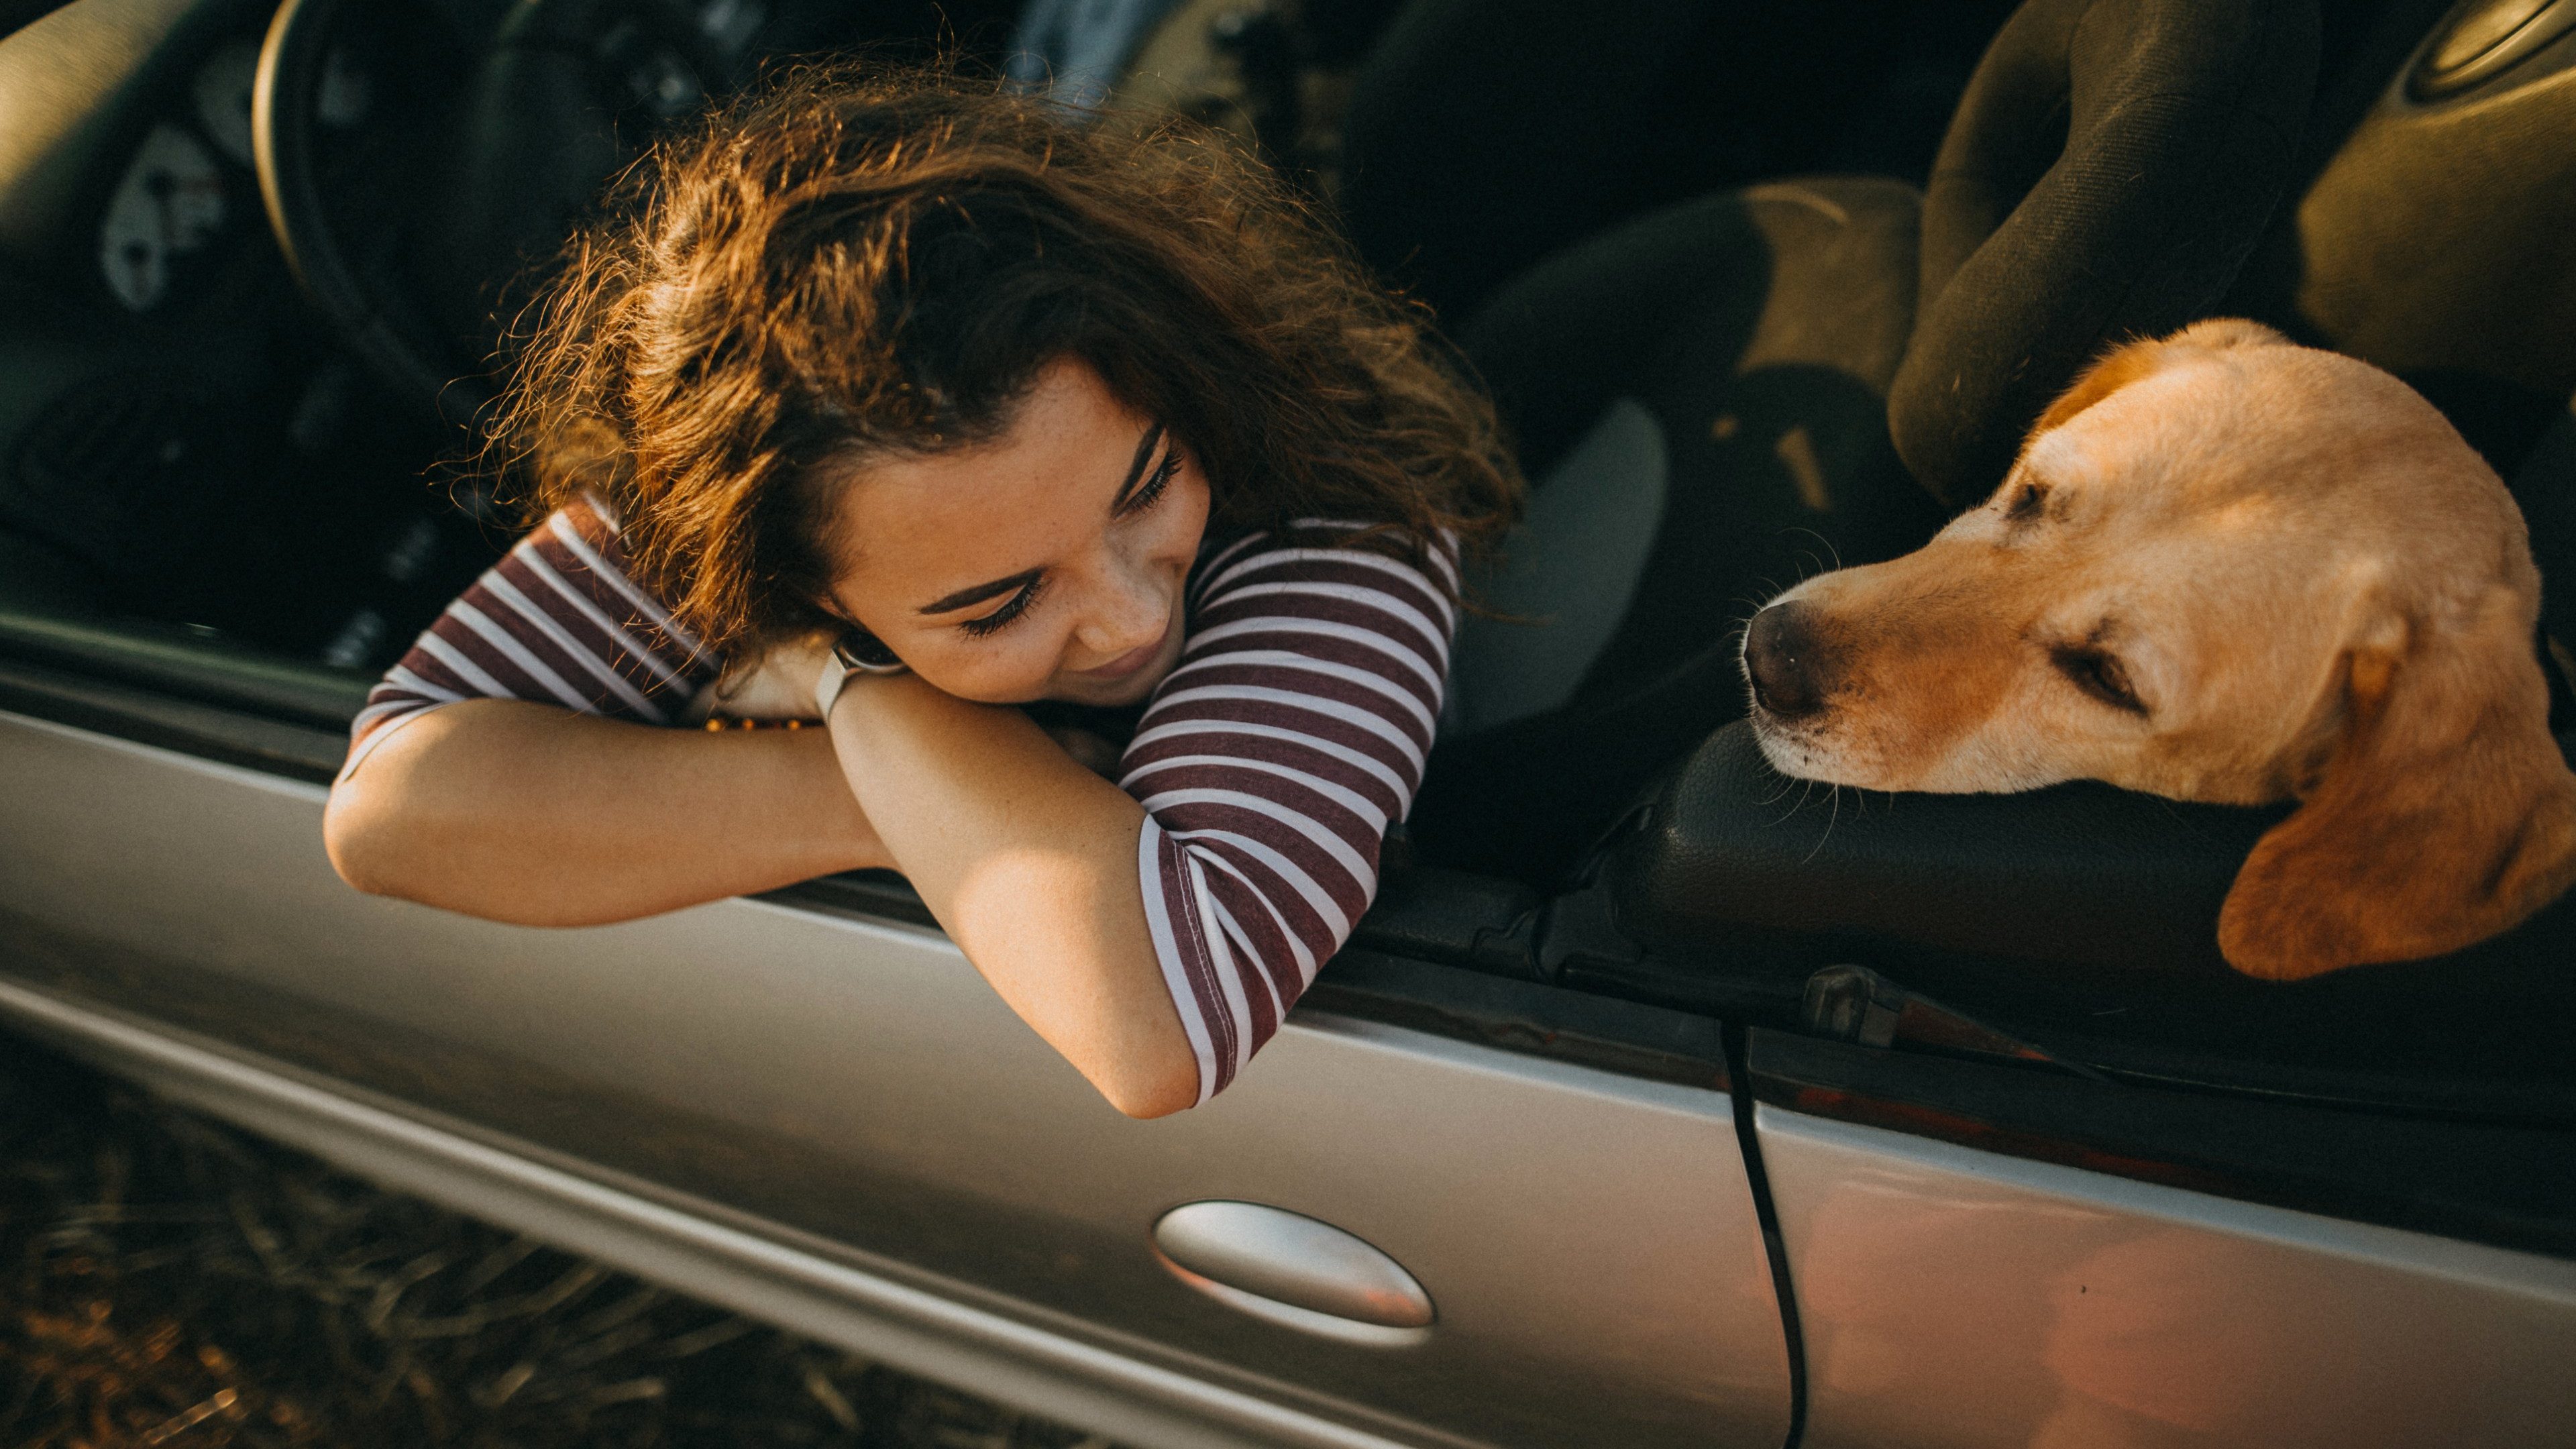 A woman sits in her car looking at her dog in the backseat.